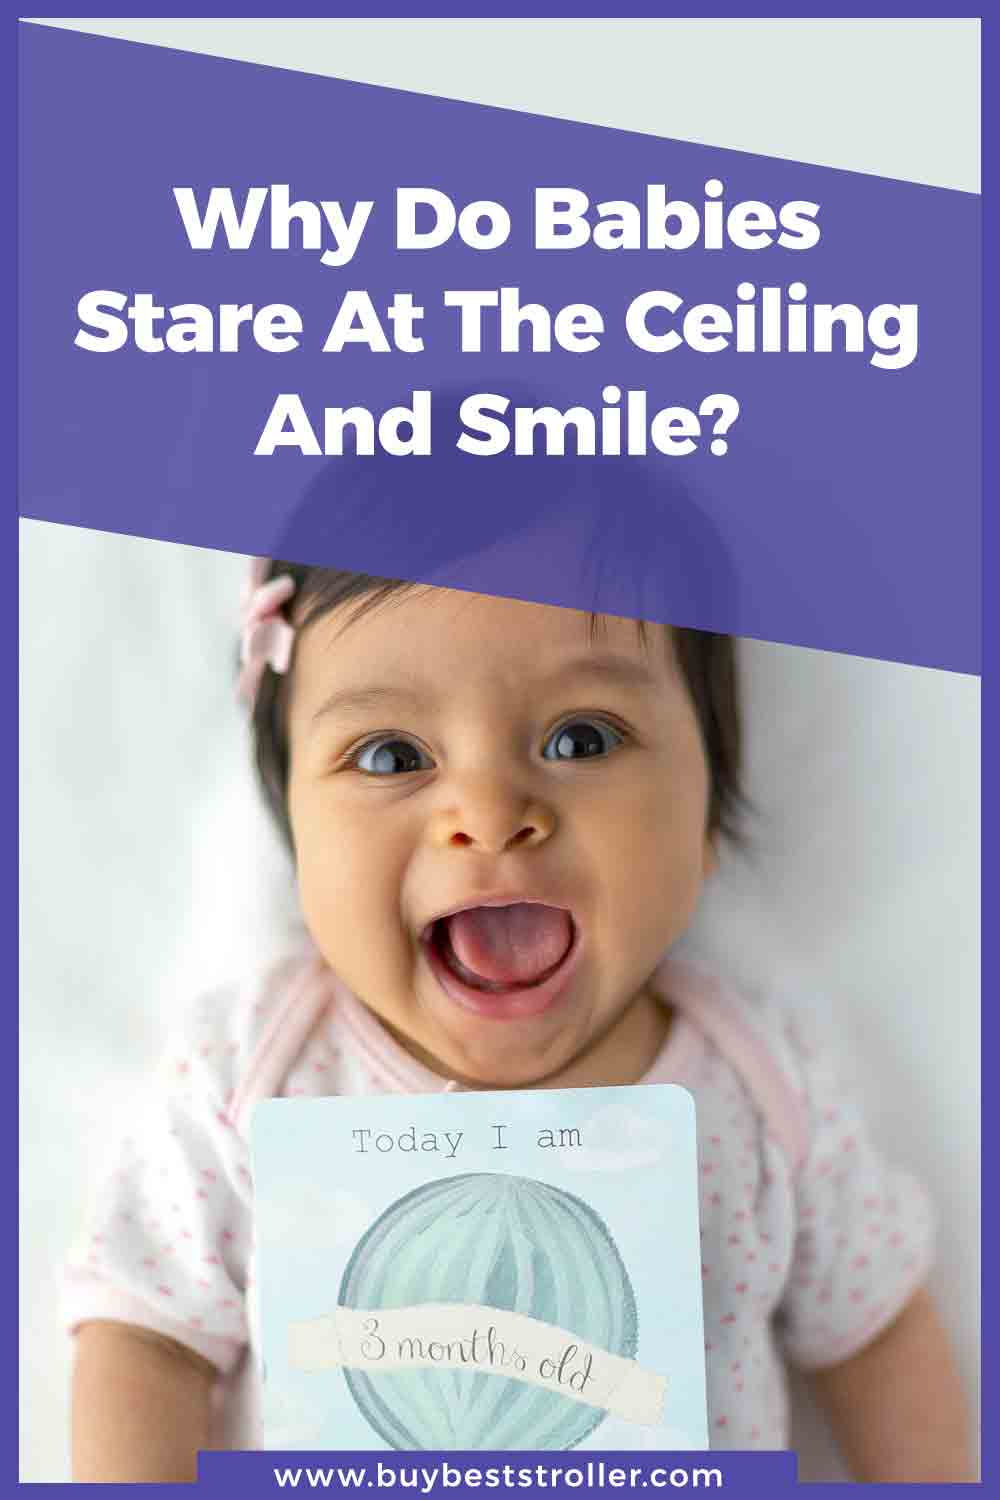 Why-Do-Babies-Stare-At-The-Ceiling-And-Smile-